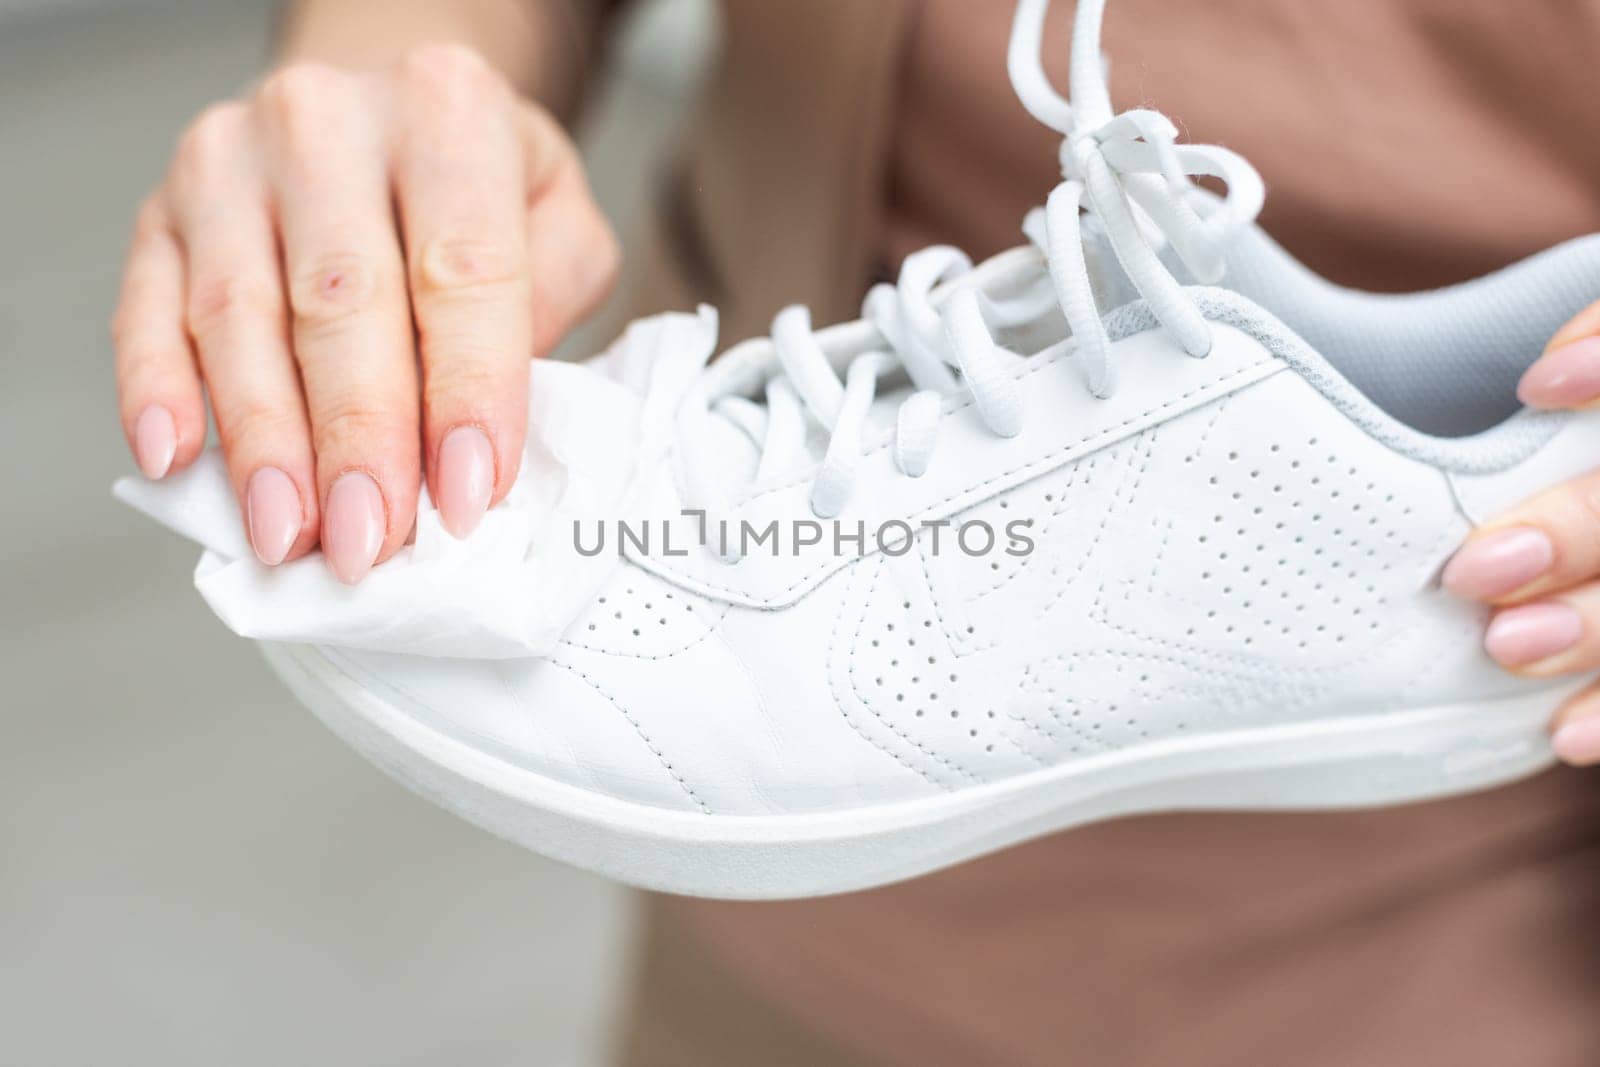 Cleaning white sneaker with cloth. High quality photo